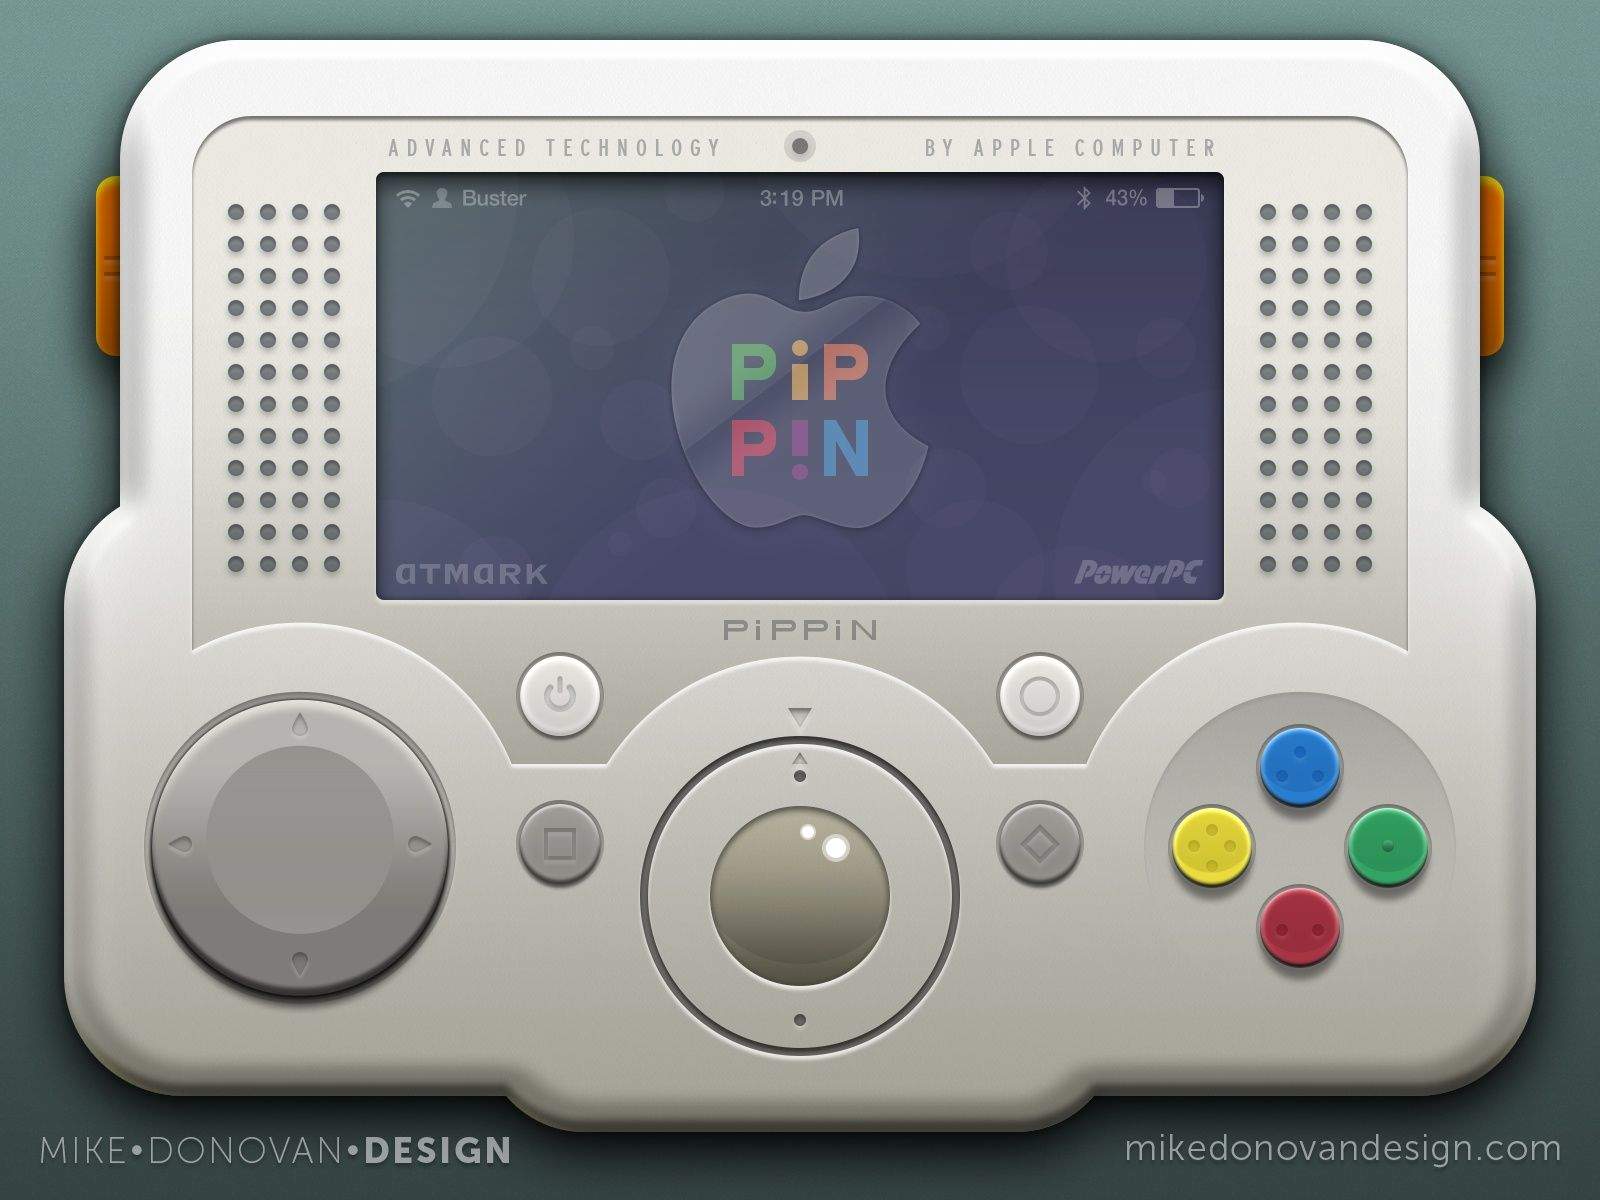 This portable Pippin design is just one of the faux Apple products in Mike Donovan's portfolio of vintage reveries. Images: Mike Donovan